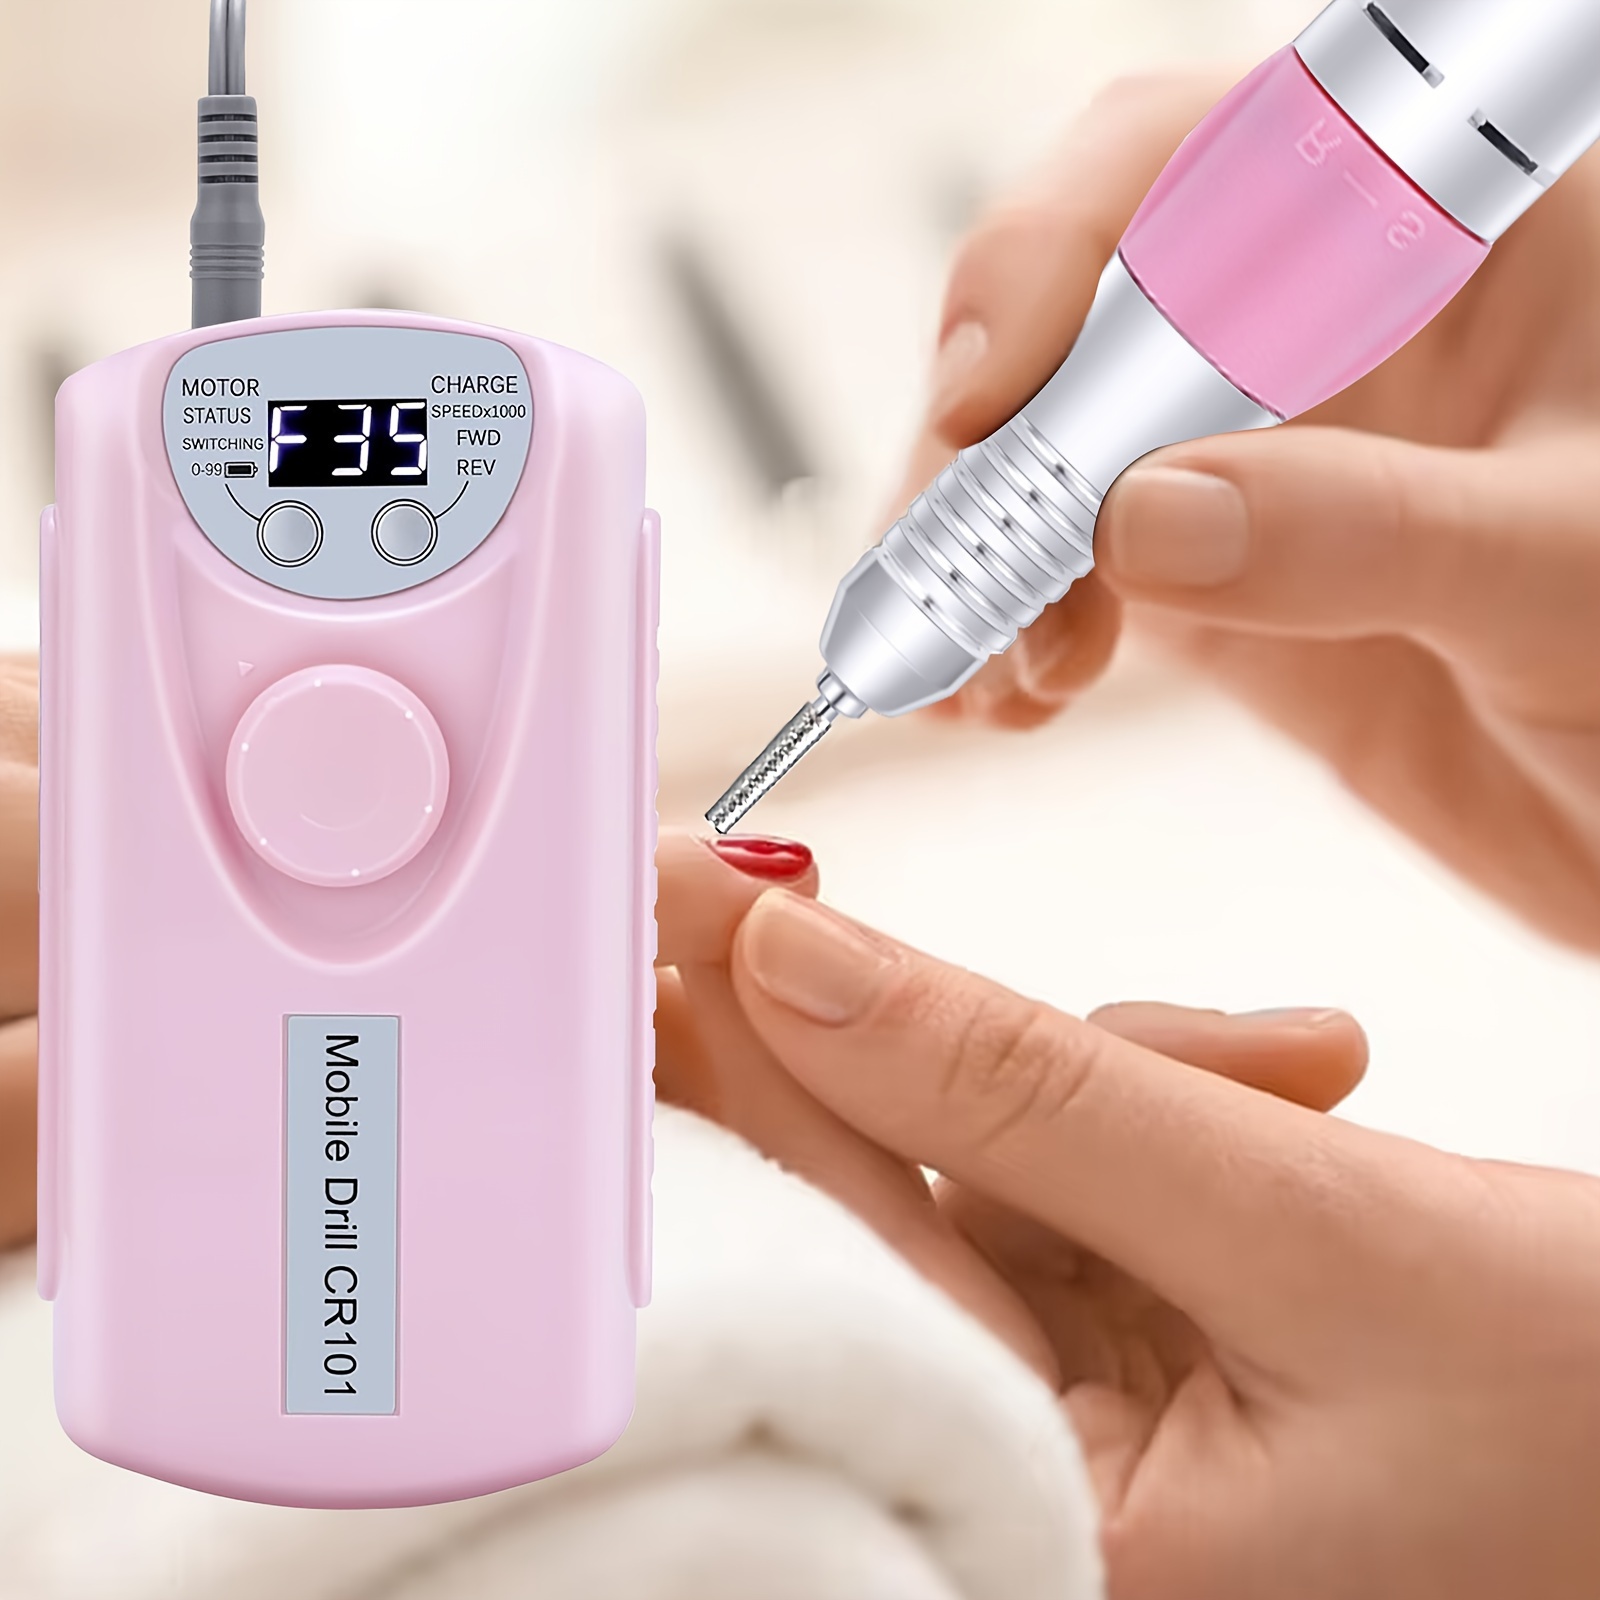 

Portable Cordless Rechargeable Electric Nail Drill, Professional Manicure Care At Home, Ideal For Salon-quality Nails & Gel Polish Removal, Includes Drill Bit Set